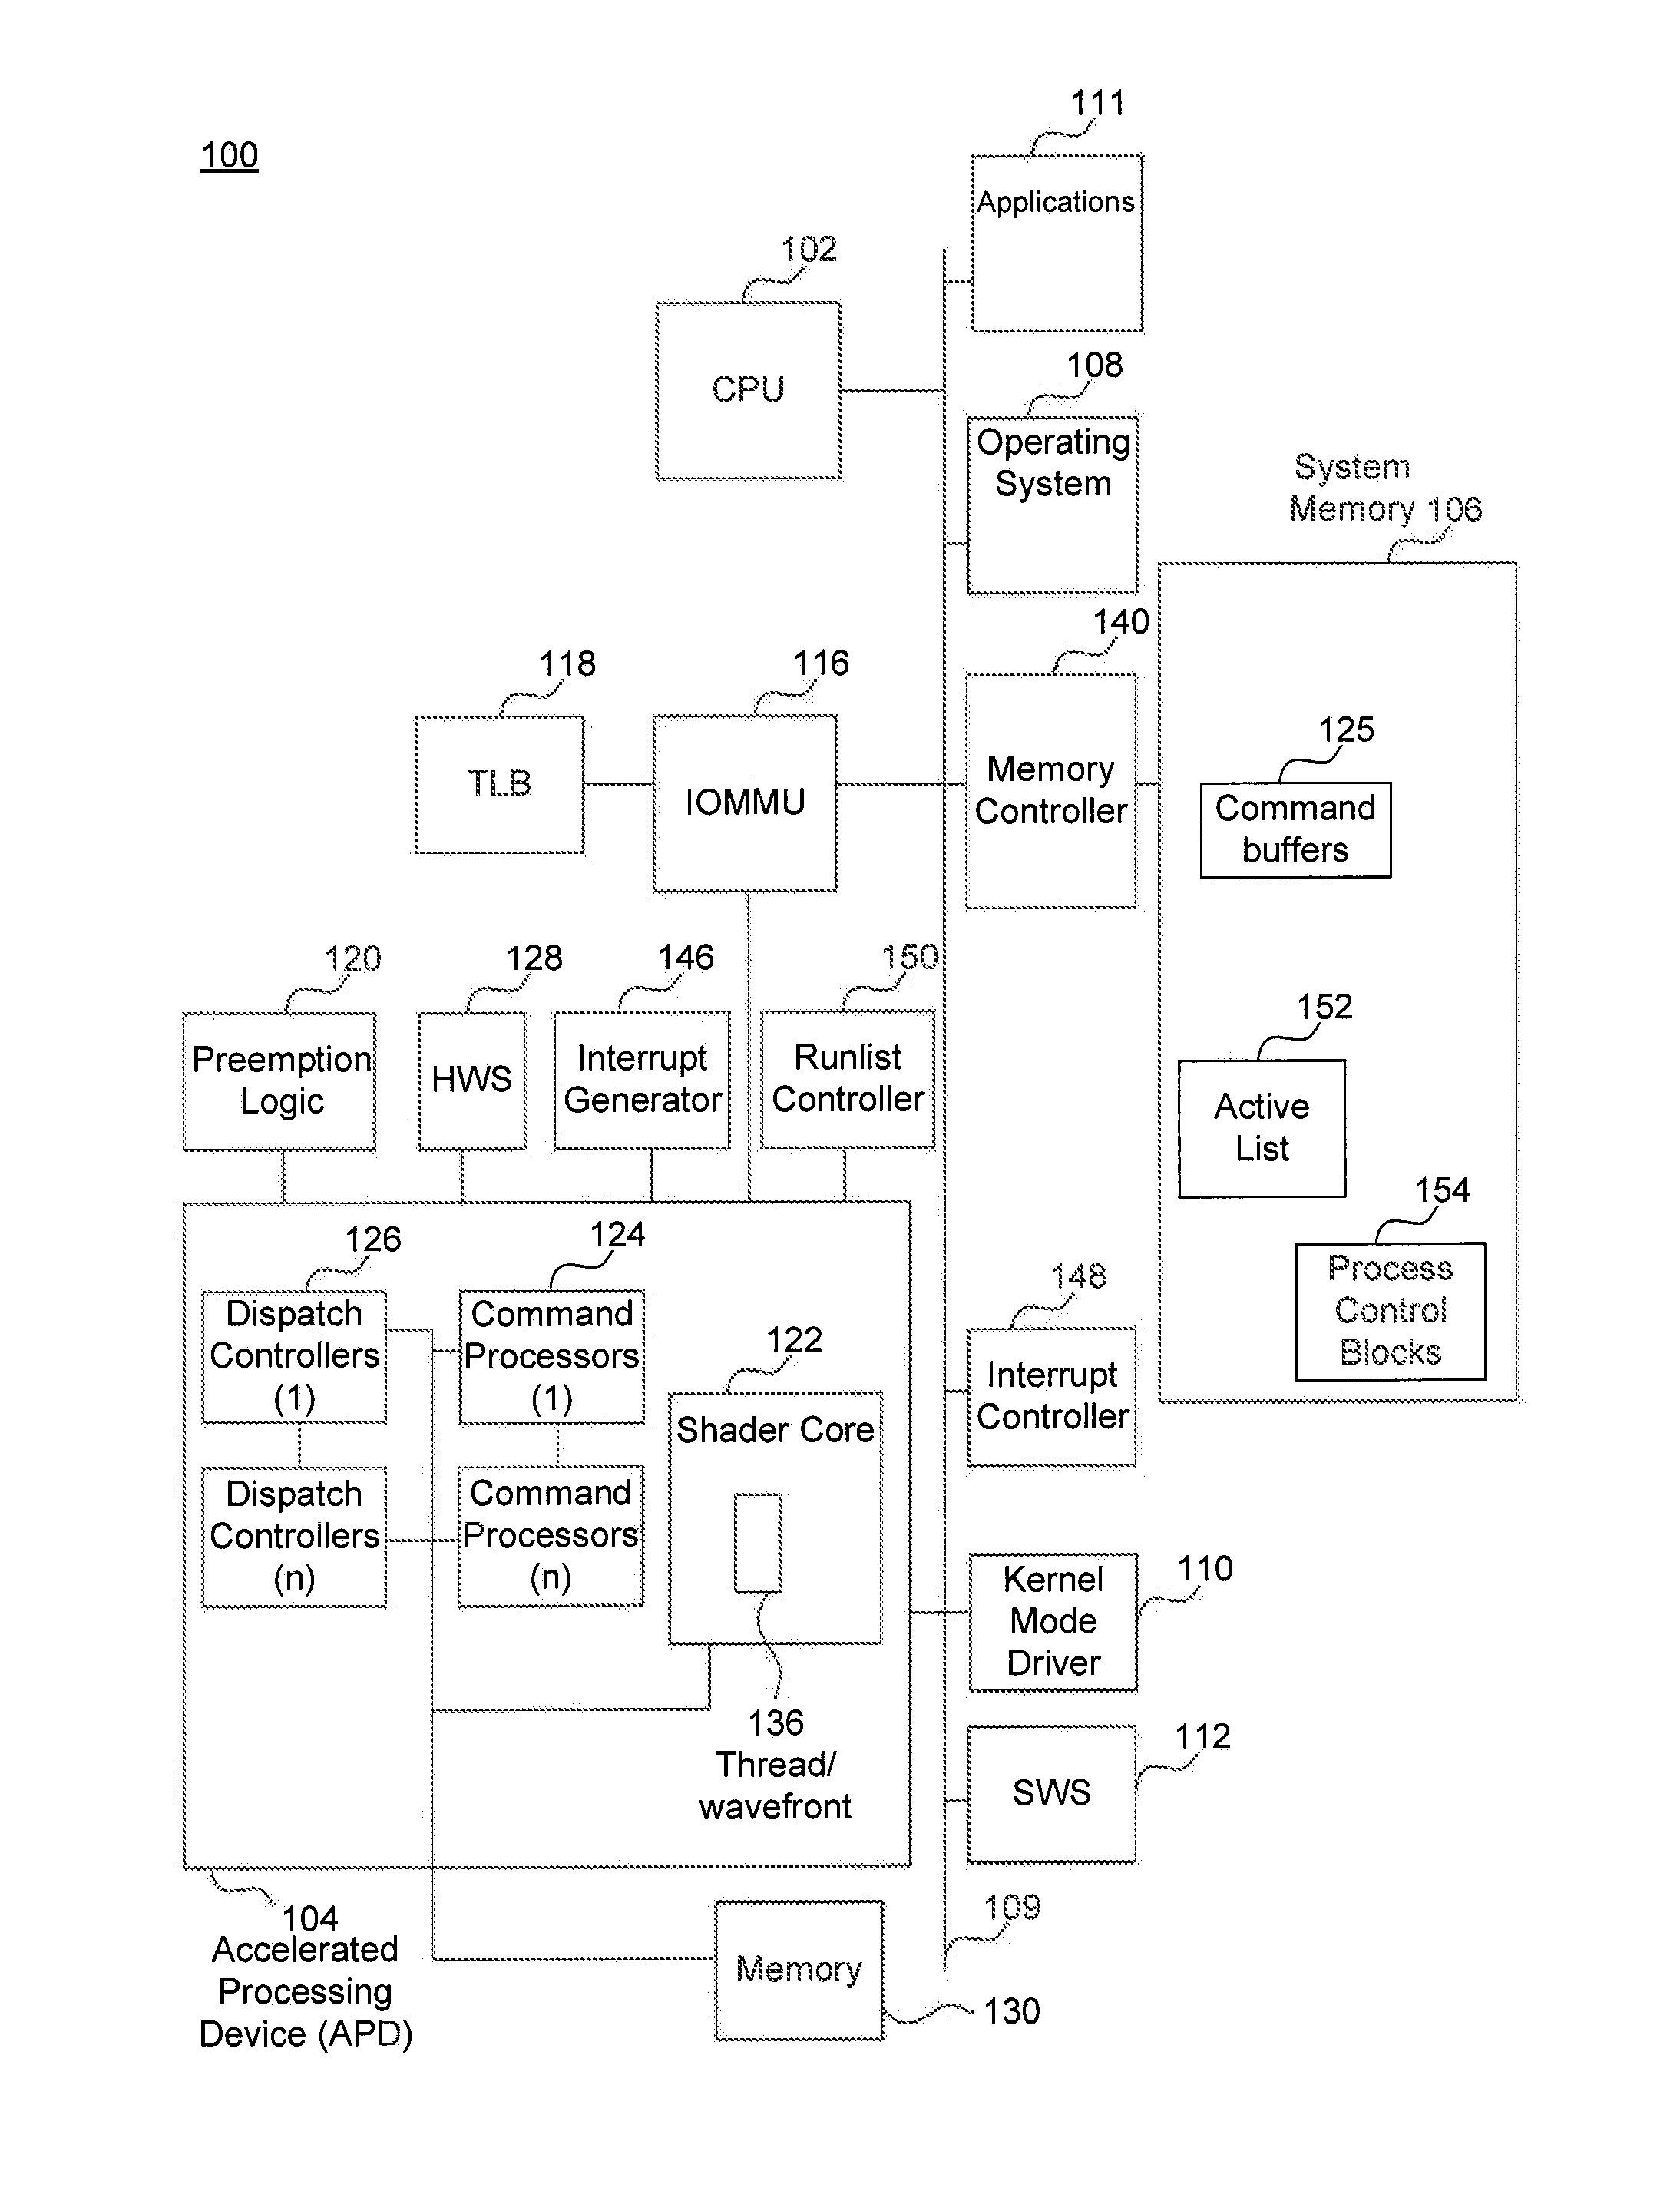 Device Discovery and Topology Reporting in a Combined CPU/GPU Architecture System